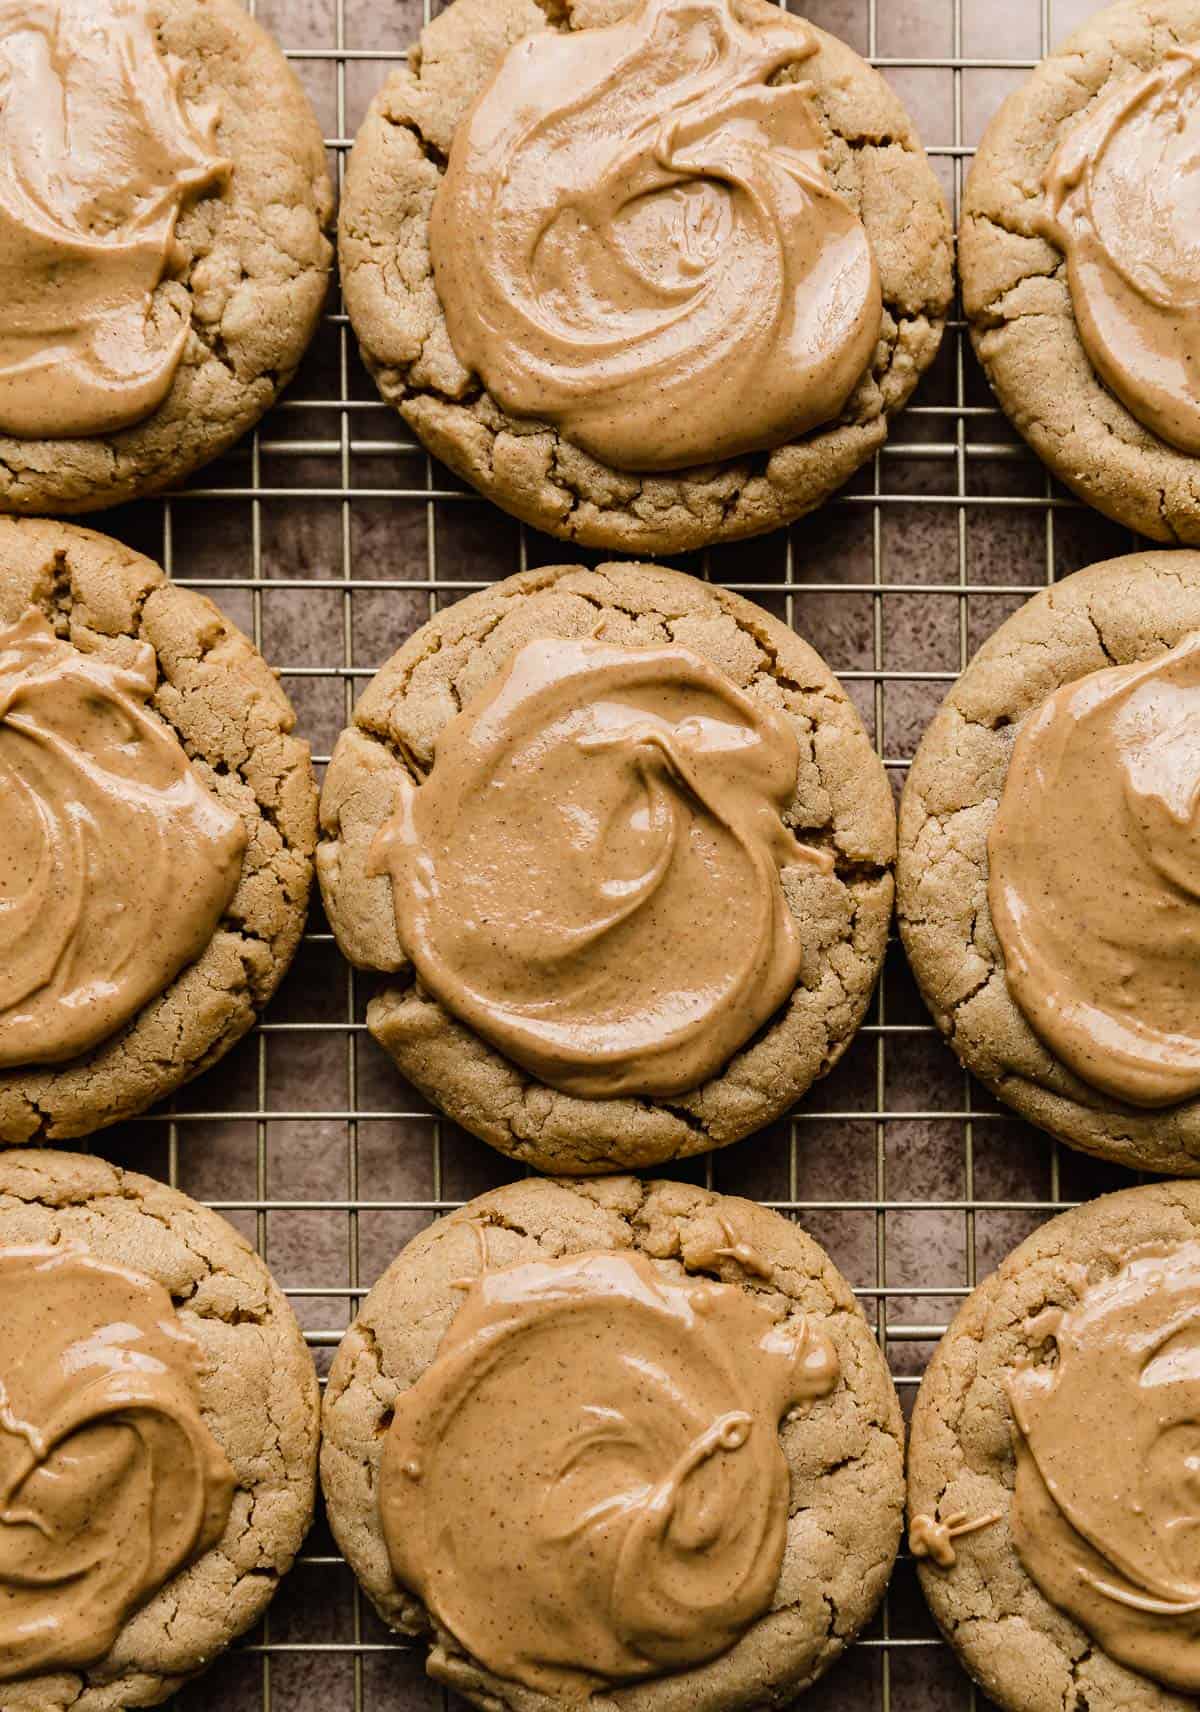 Peanut butter cookies topped with a smooth melted peanut butter topping on a wire rack.